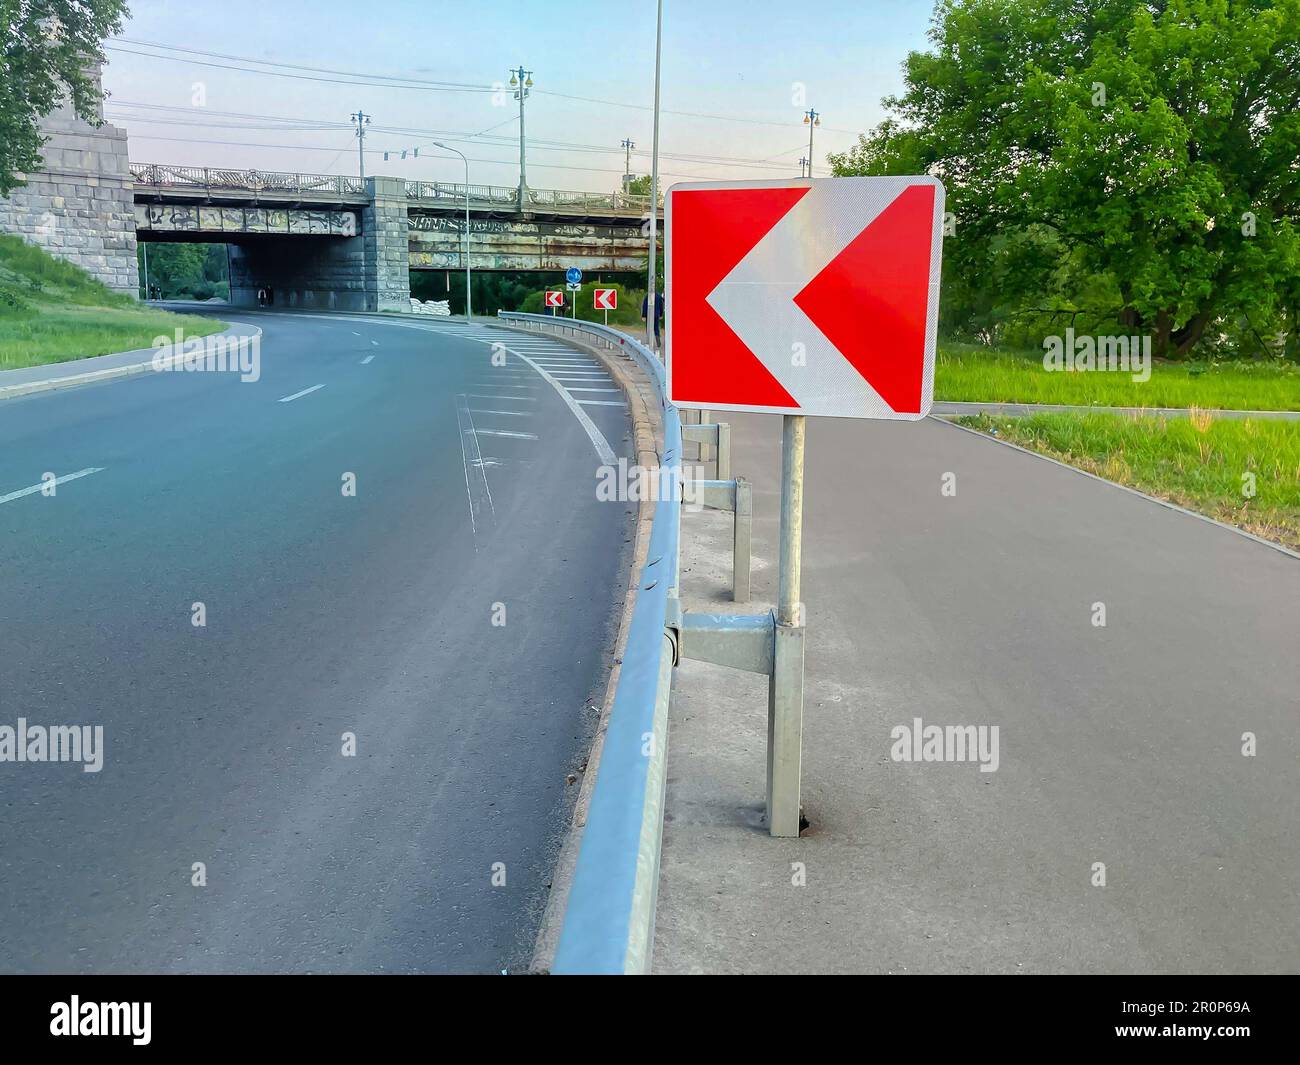 Left turn sign: Road signs warn of a sharp turn on a narrow, rocky road. Traffic safety. Road barrier. Attention concept. Stock Photo